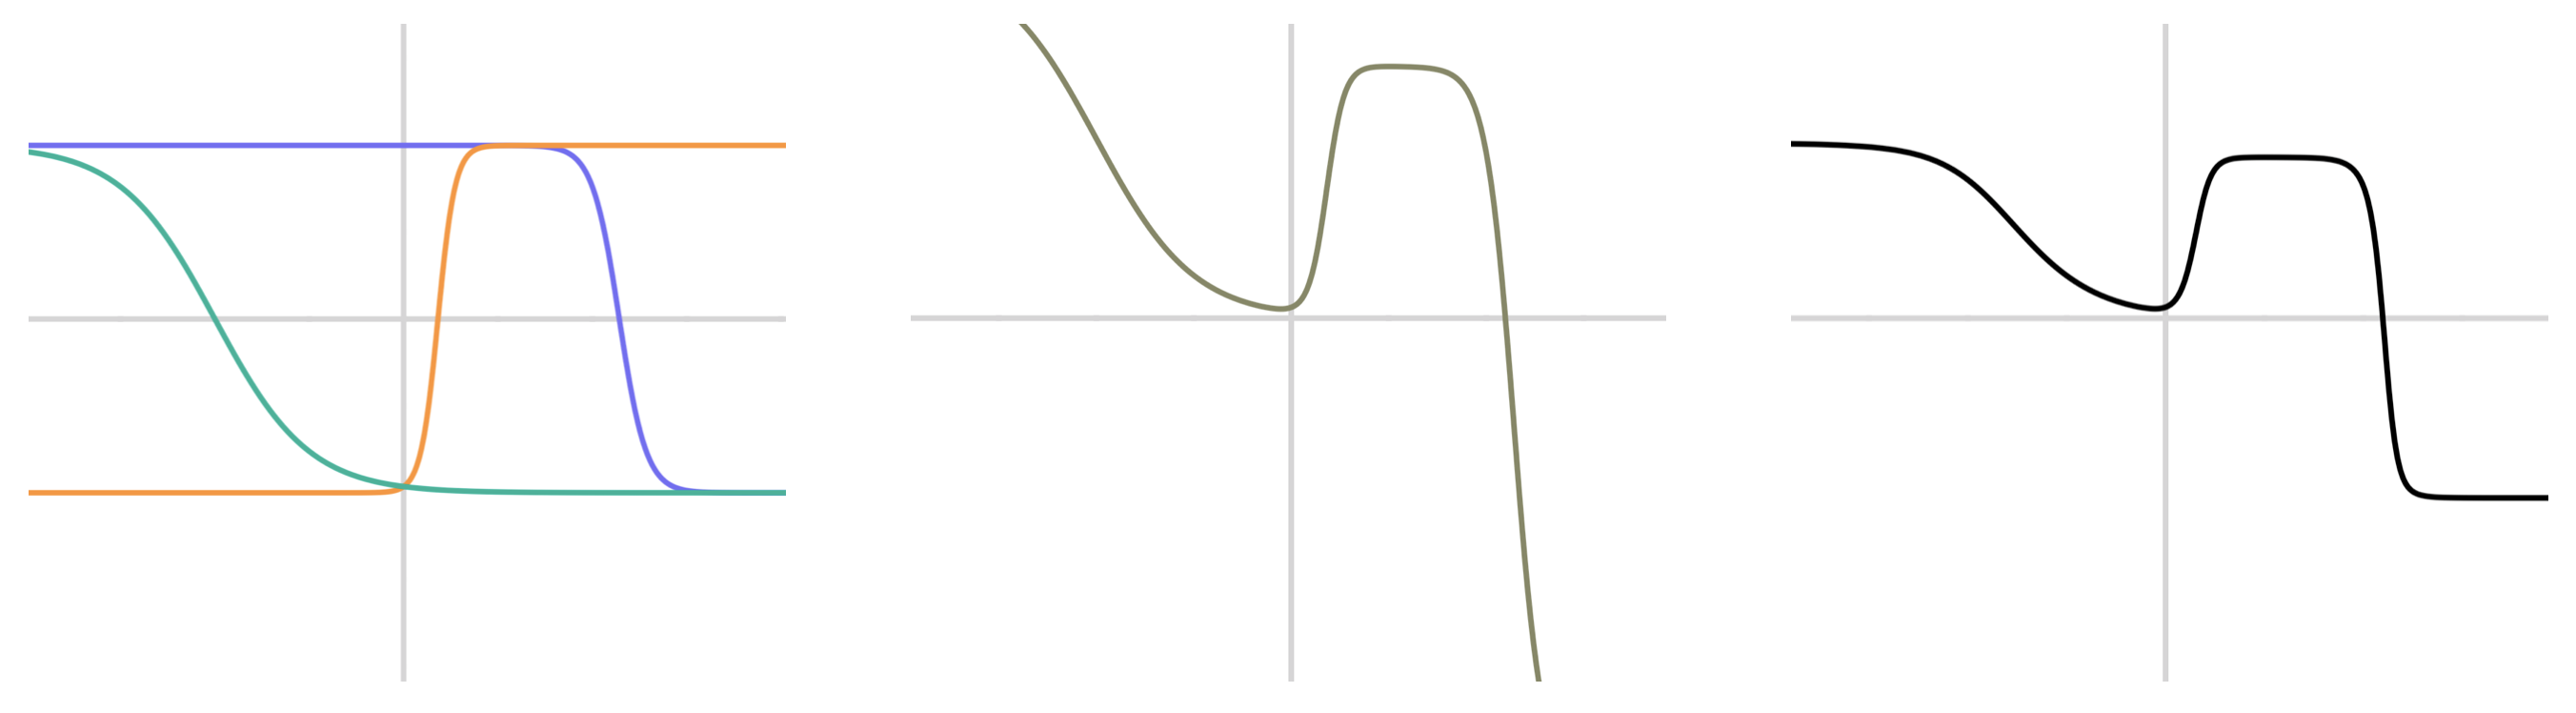 Figure 4: A visual explanation of a simple 2-layer neural network. This network has a 1-dimensional input and a 1-dimensional output. Left: three different color-coded \tanh() curves, each with its own weight and bias term. Middle: A linear combination of those three curves. Right: \tanh() applied to the curve in the middle.